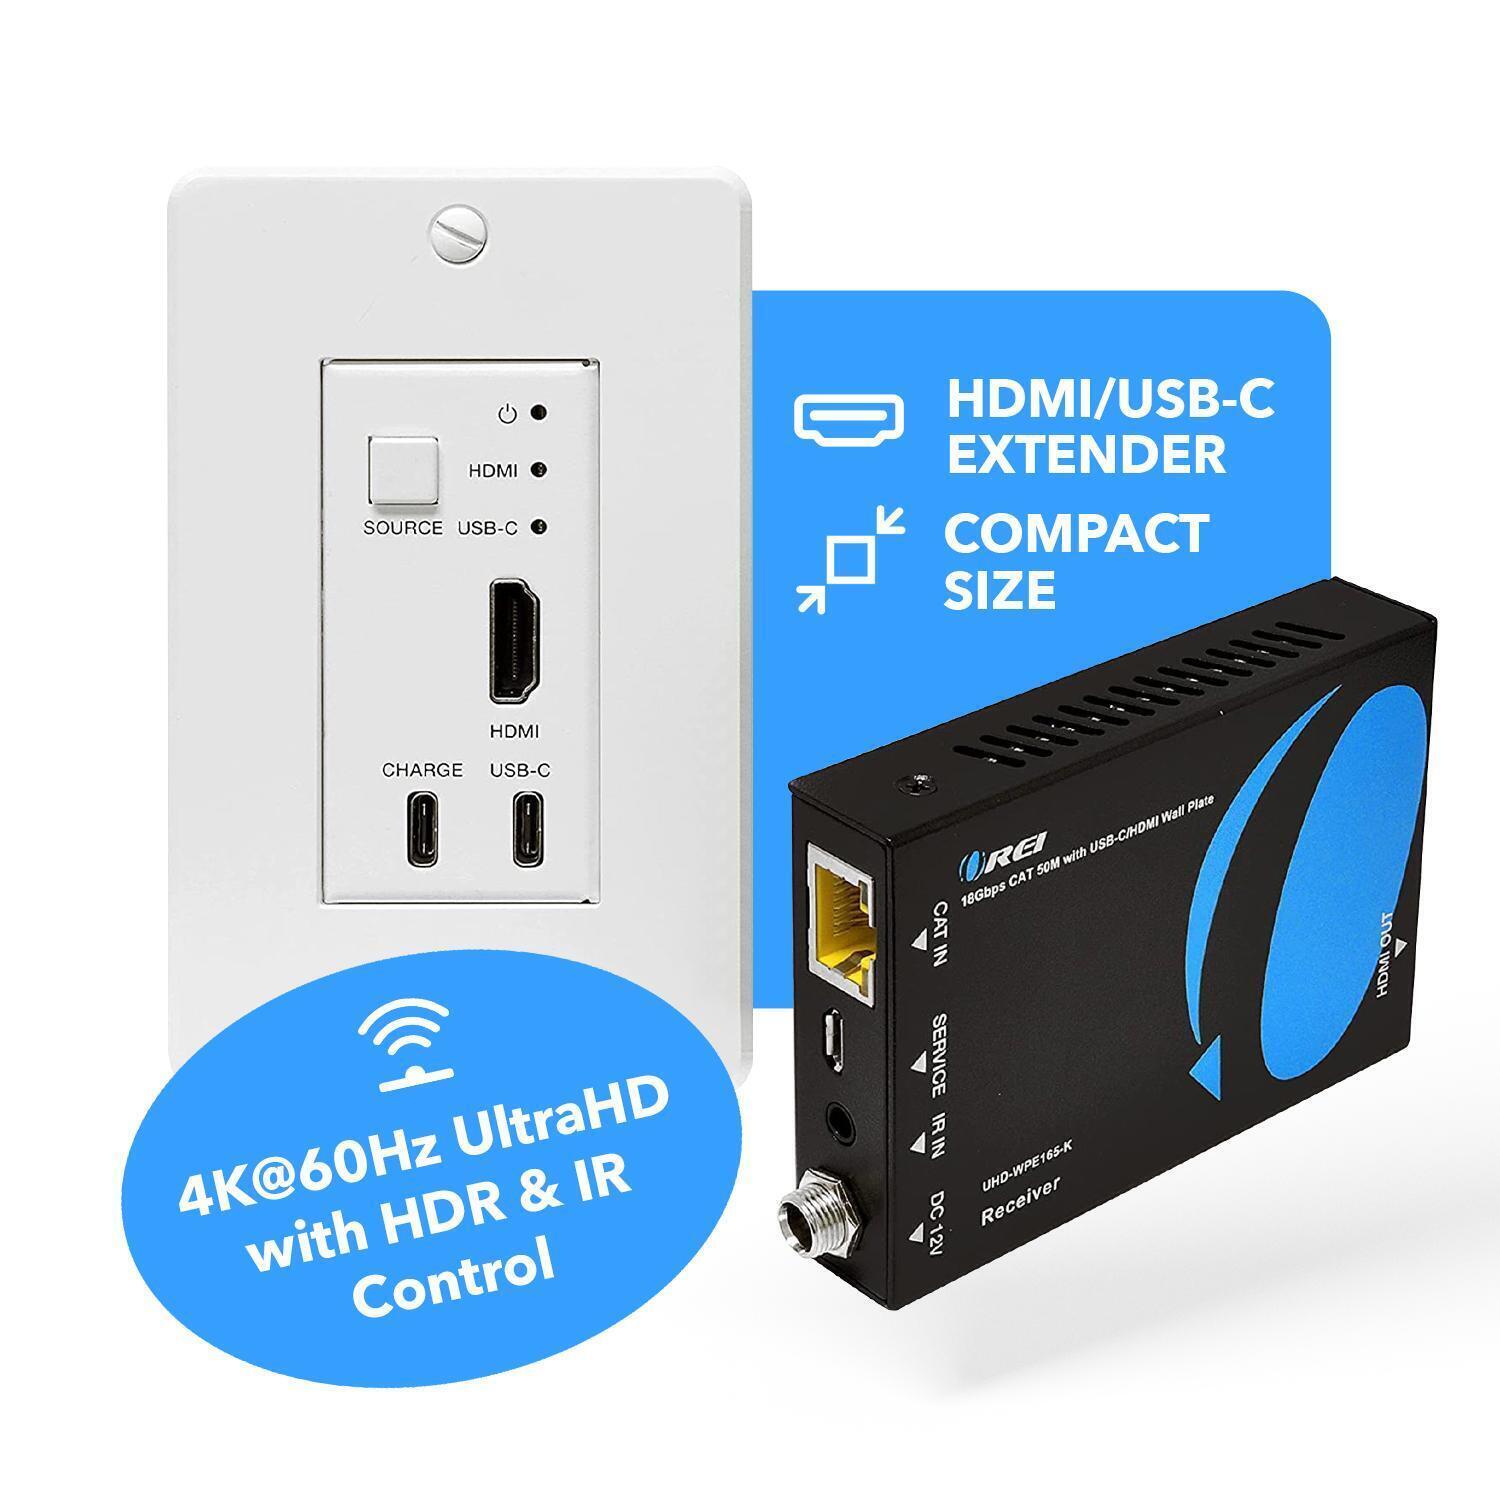 4K HDMI/USB-C Extender by OREI, Over Single Cat6/Cat7 Cable Wall Plate Transmitter 4K @ 60Hz UltraHD with HDR & IR Control - Up to 165 ft alternate image